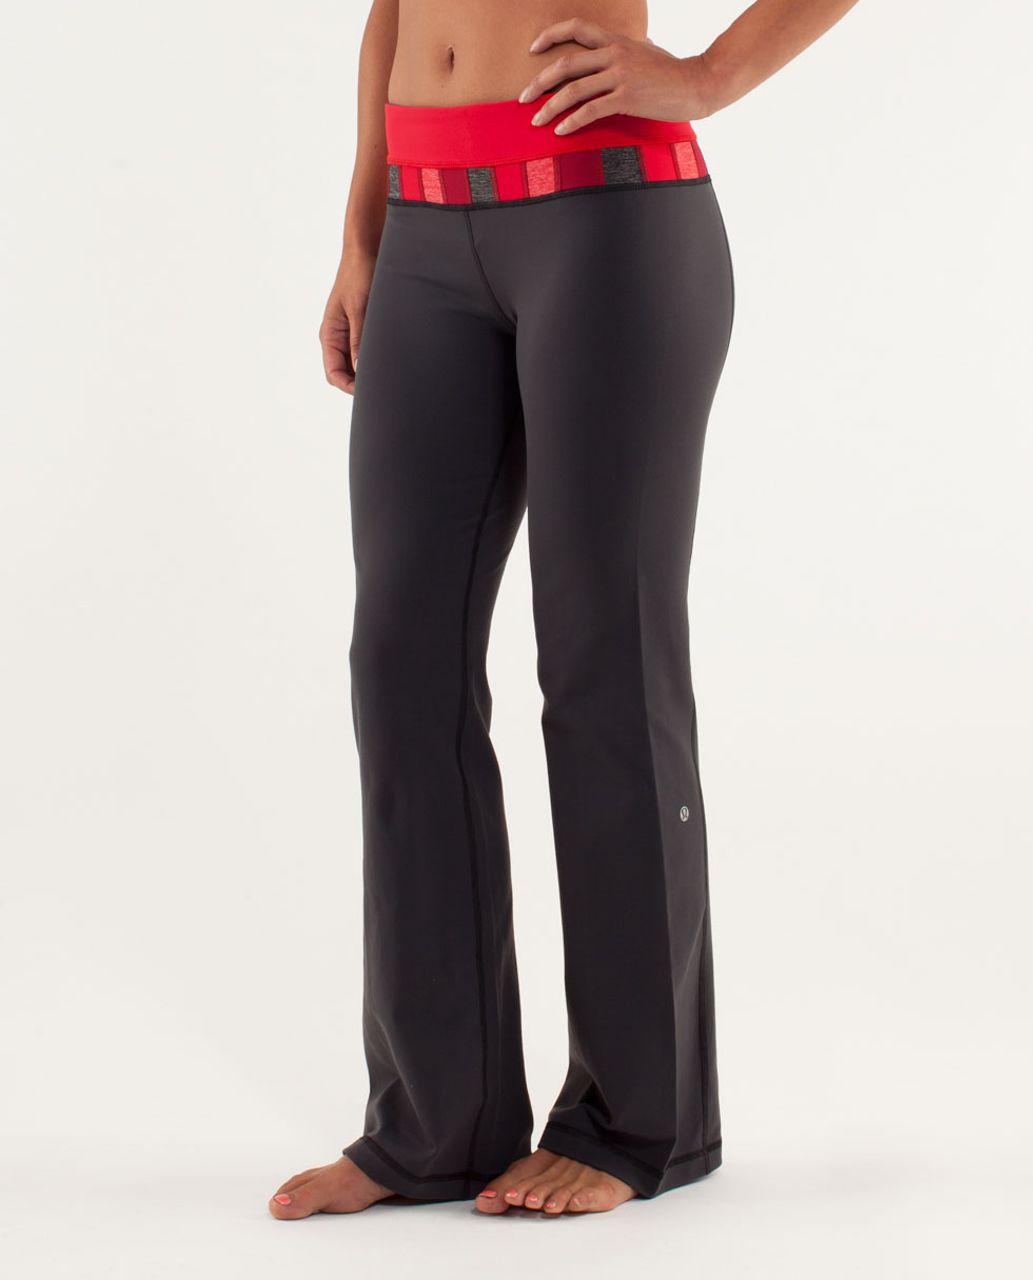 ❤️ NEW Lululemon Groove Pant Flare Super High Rise Flared Smoky Red NWT - Size  4